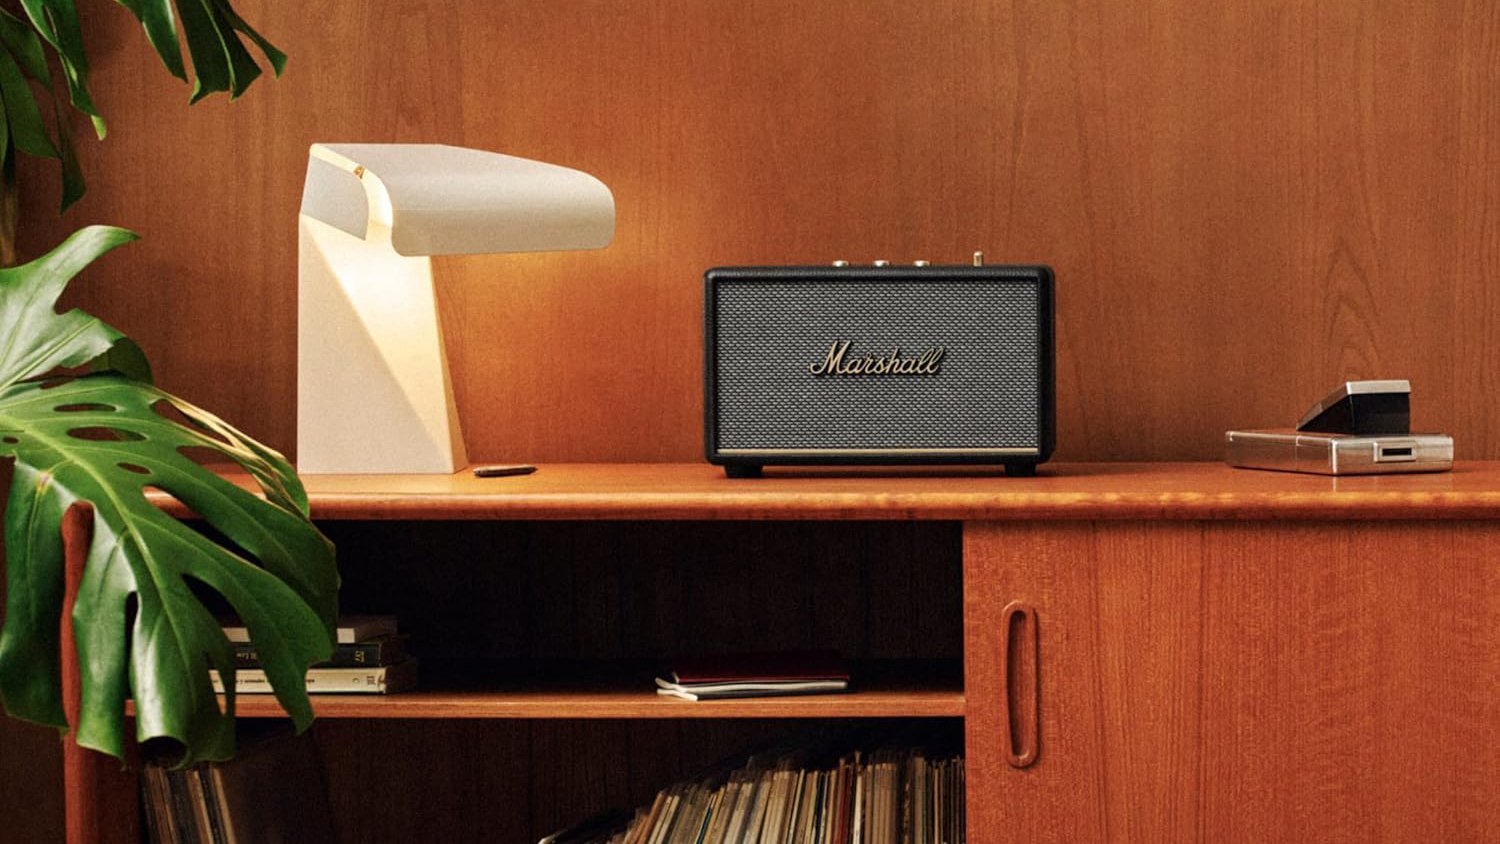 Deal: Save $50 on this amazing-looking Marshall Acton III speaker